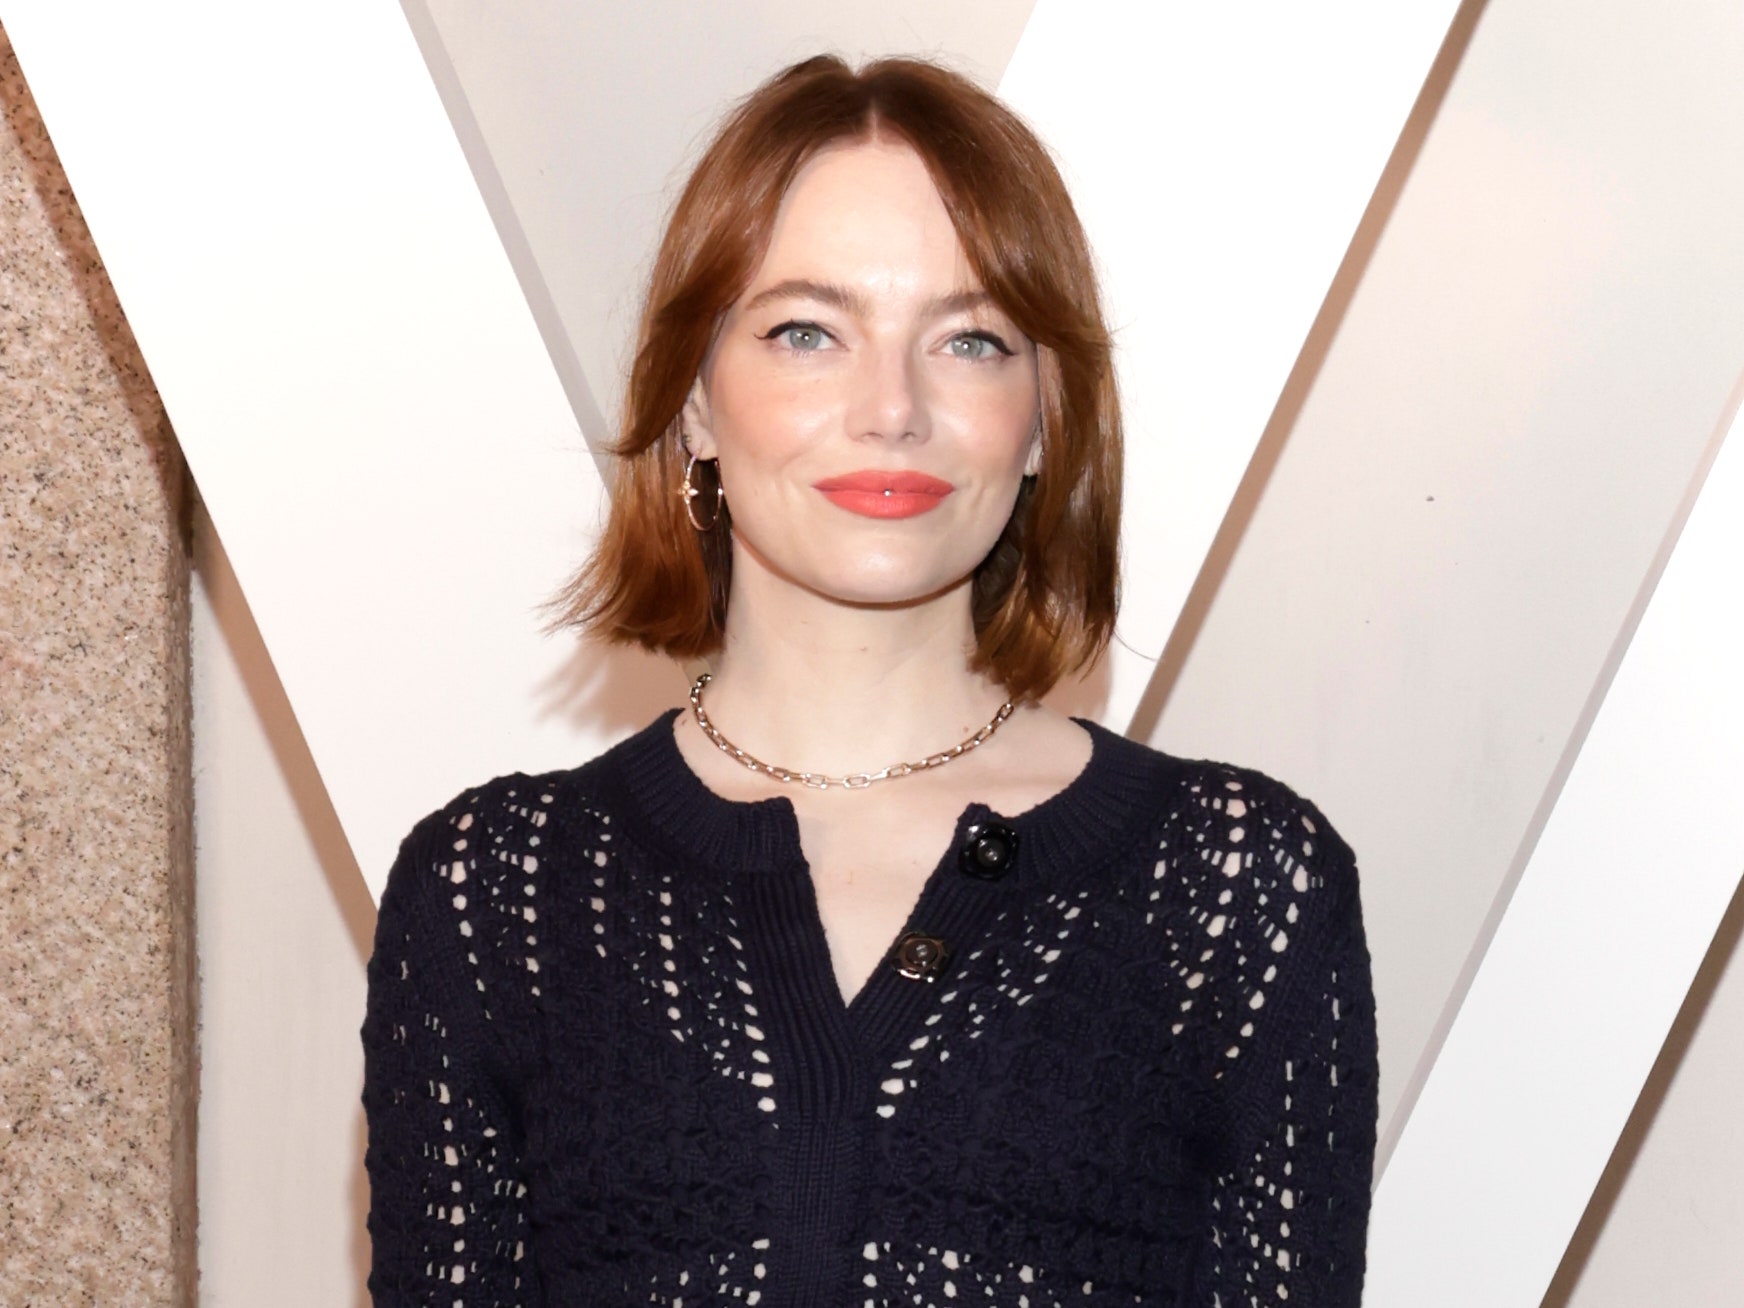 First Scarlett Johansson, Then Cara Delevingne, Now Emma Stone: The Blunt Bob Is Back On Top